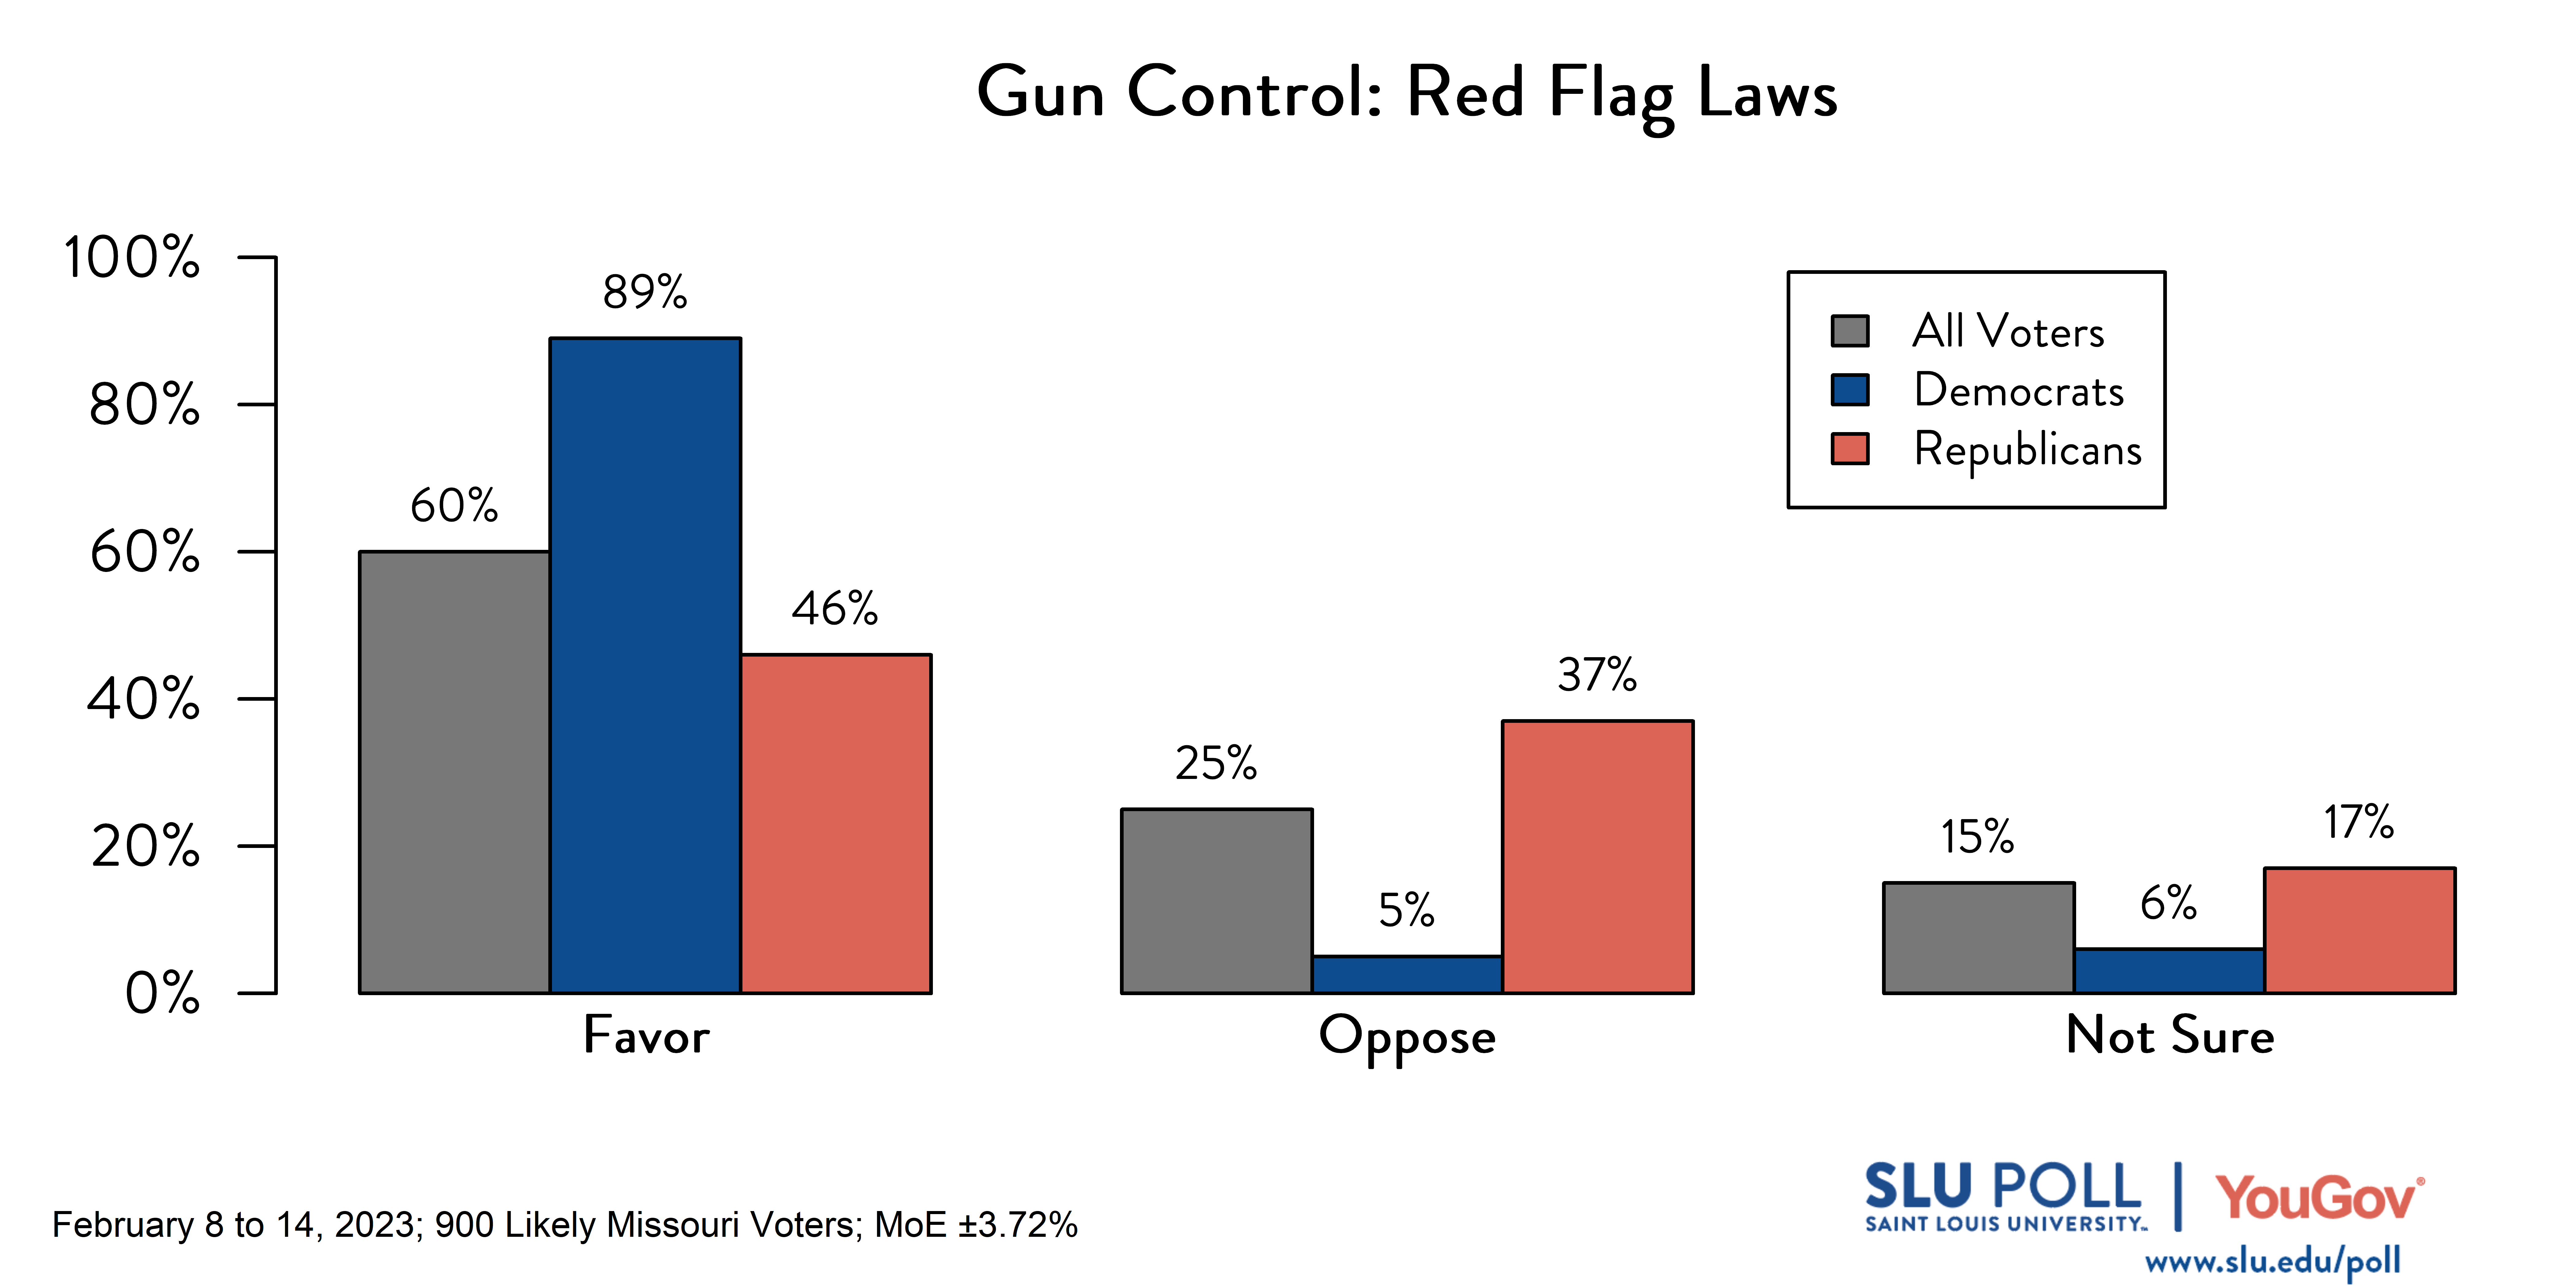 Likely voters' responses to 'Do you favor or oppose the following gun policies becoming law in Missouri: Red flag laws that allow a court to temporarily remove guns from people that are believed to pose a danger to themself or others?': 60% Favor, 25% Oppose, and 15% Not sure. Democratic voters' responses: ' 89% Favor, 5% Oppose, and 6% Not sure. Republican voters' responses: 46% Favor, 37% Oppose, and 17% Not sure.